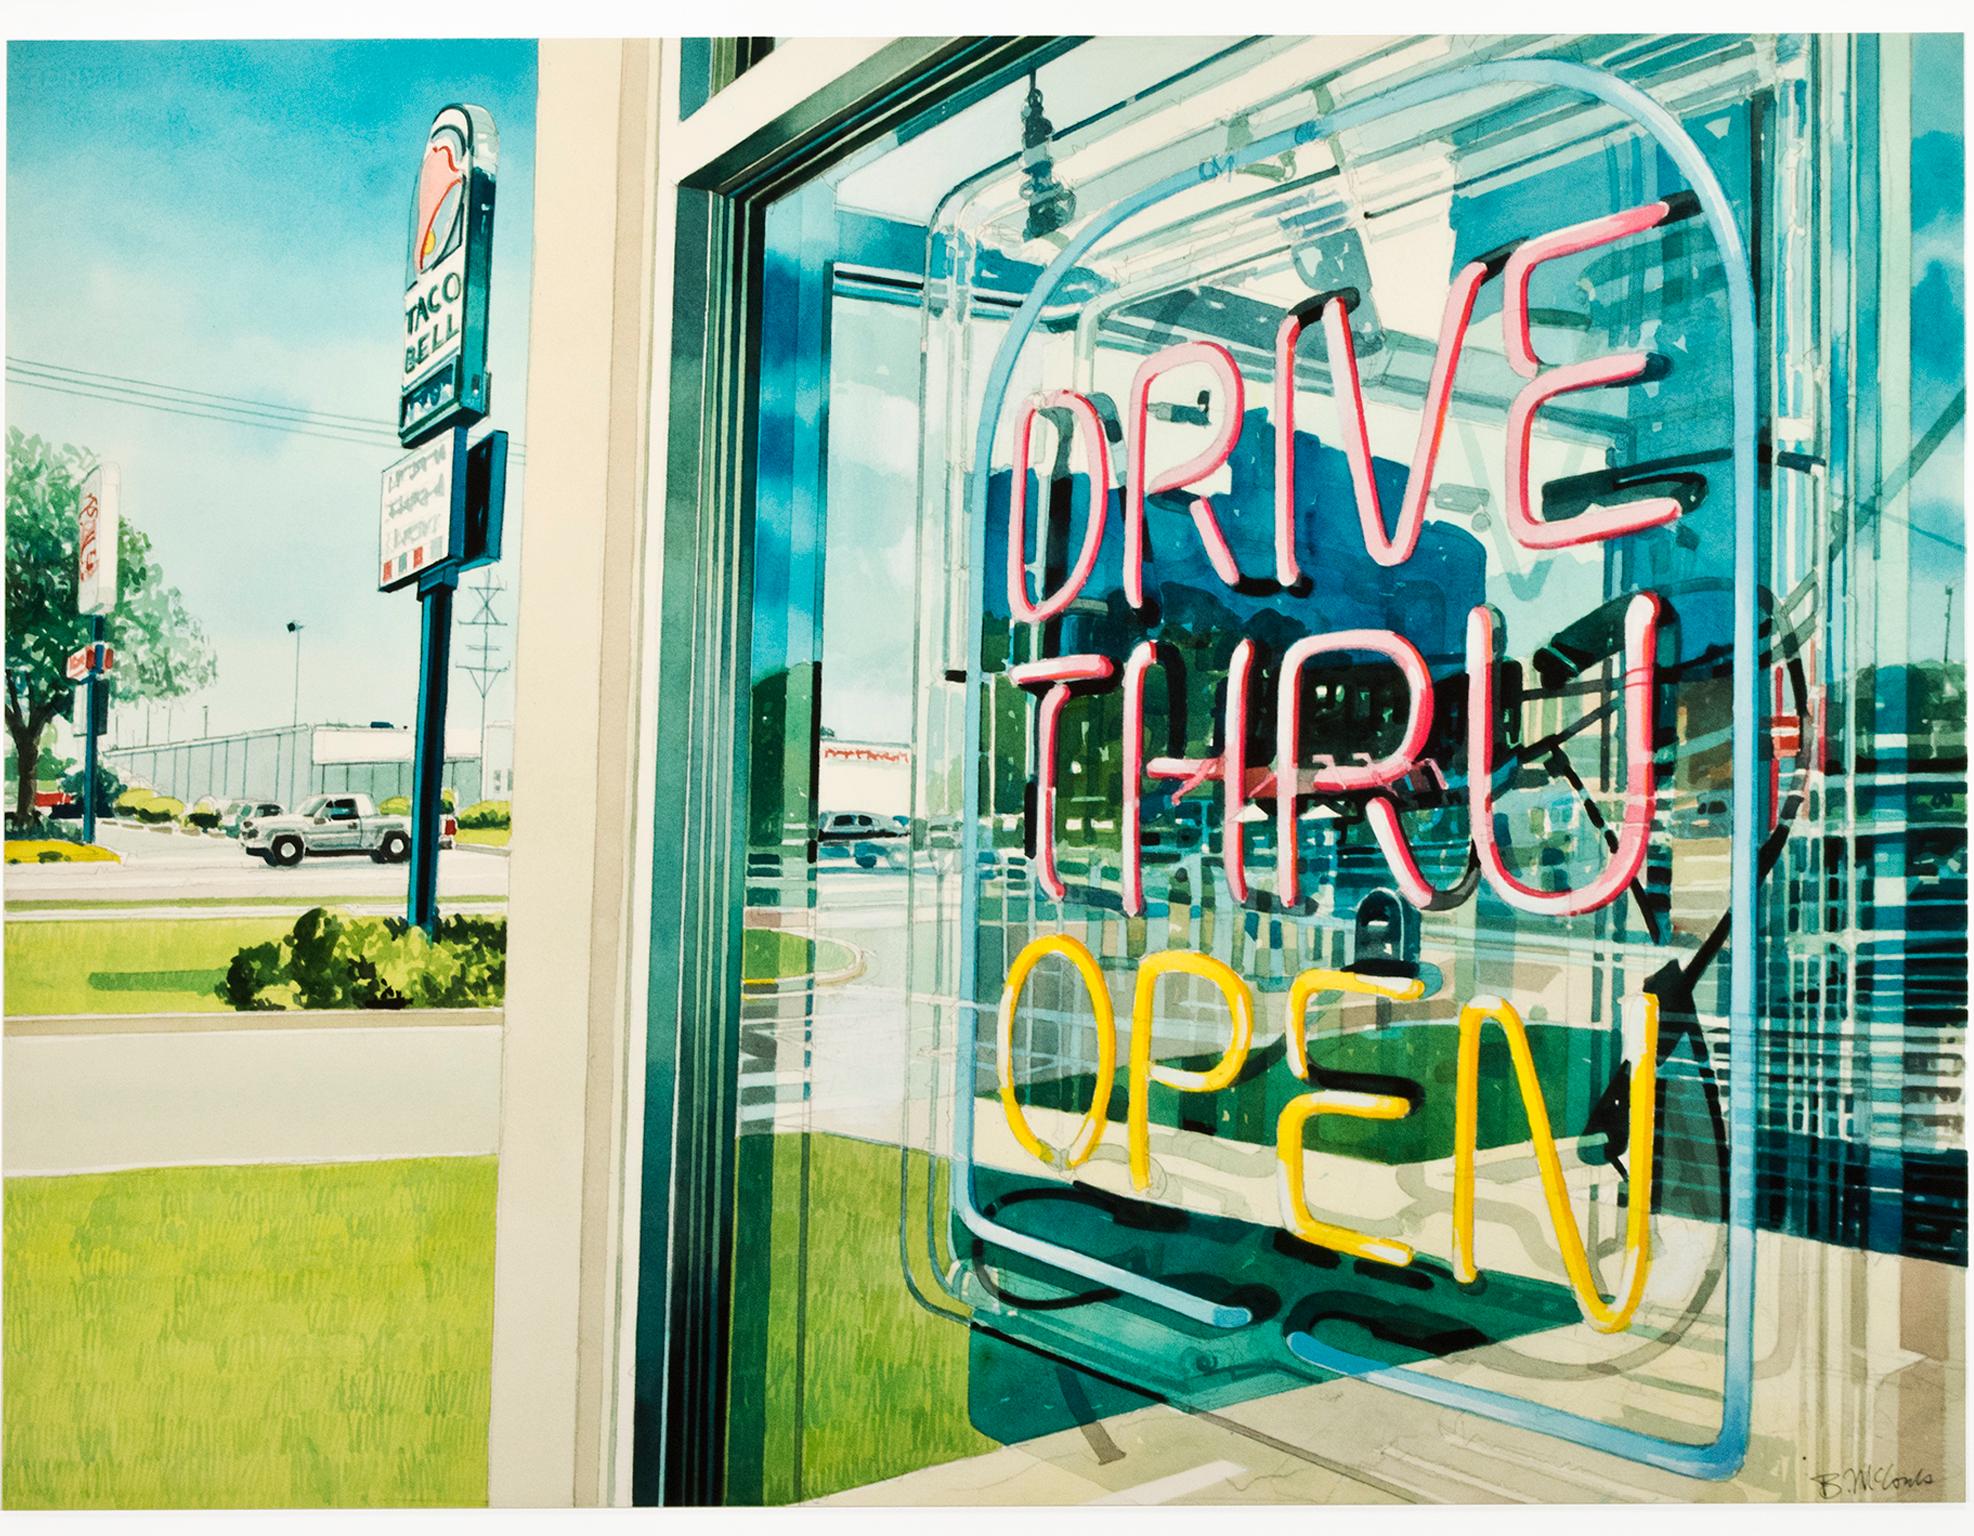 "Drive Thru Open" is an original watercolor painting by Bruce McCombs. The artist signed the piece lower right. This piece features a photorealist depiction of a drive thru sign in a reflective window. A Taco Bell sign rises in the background. 

21